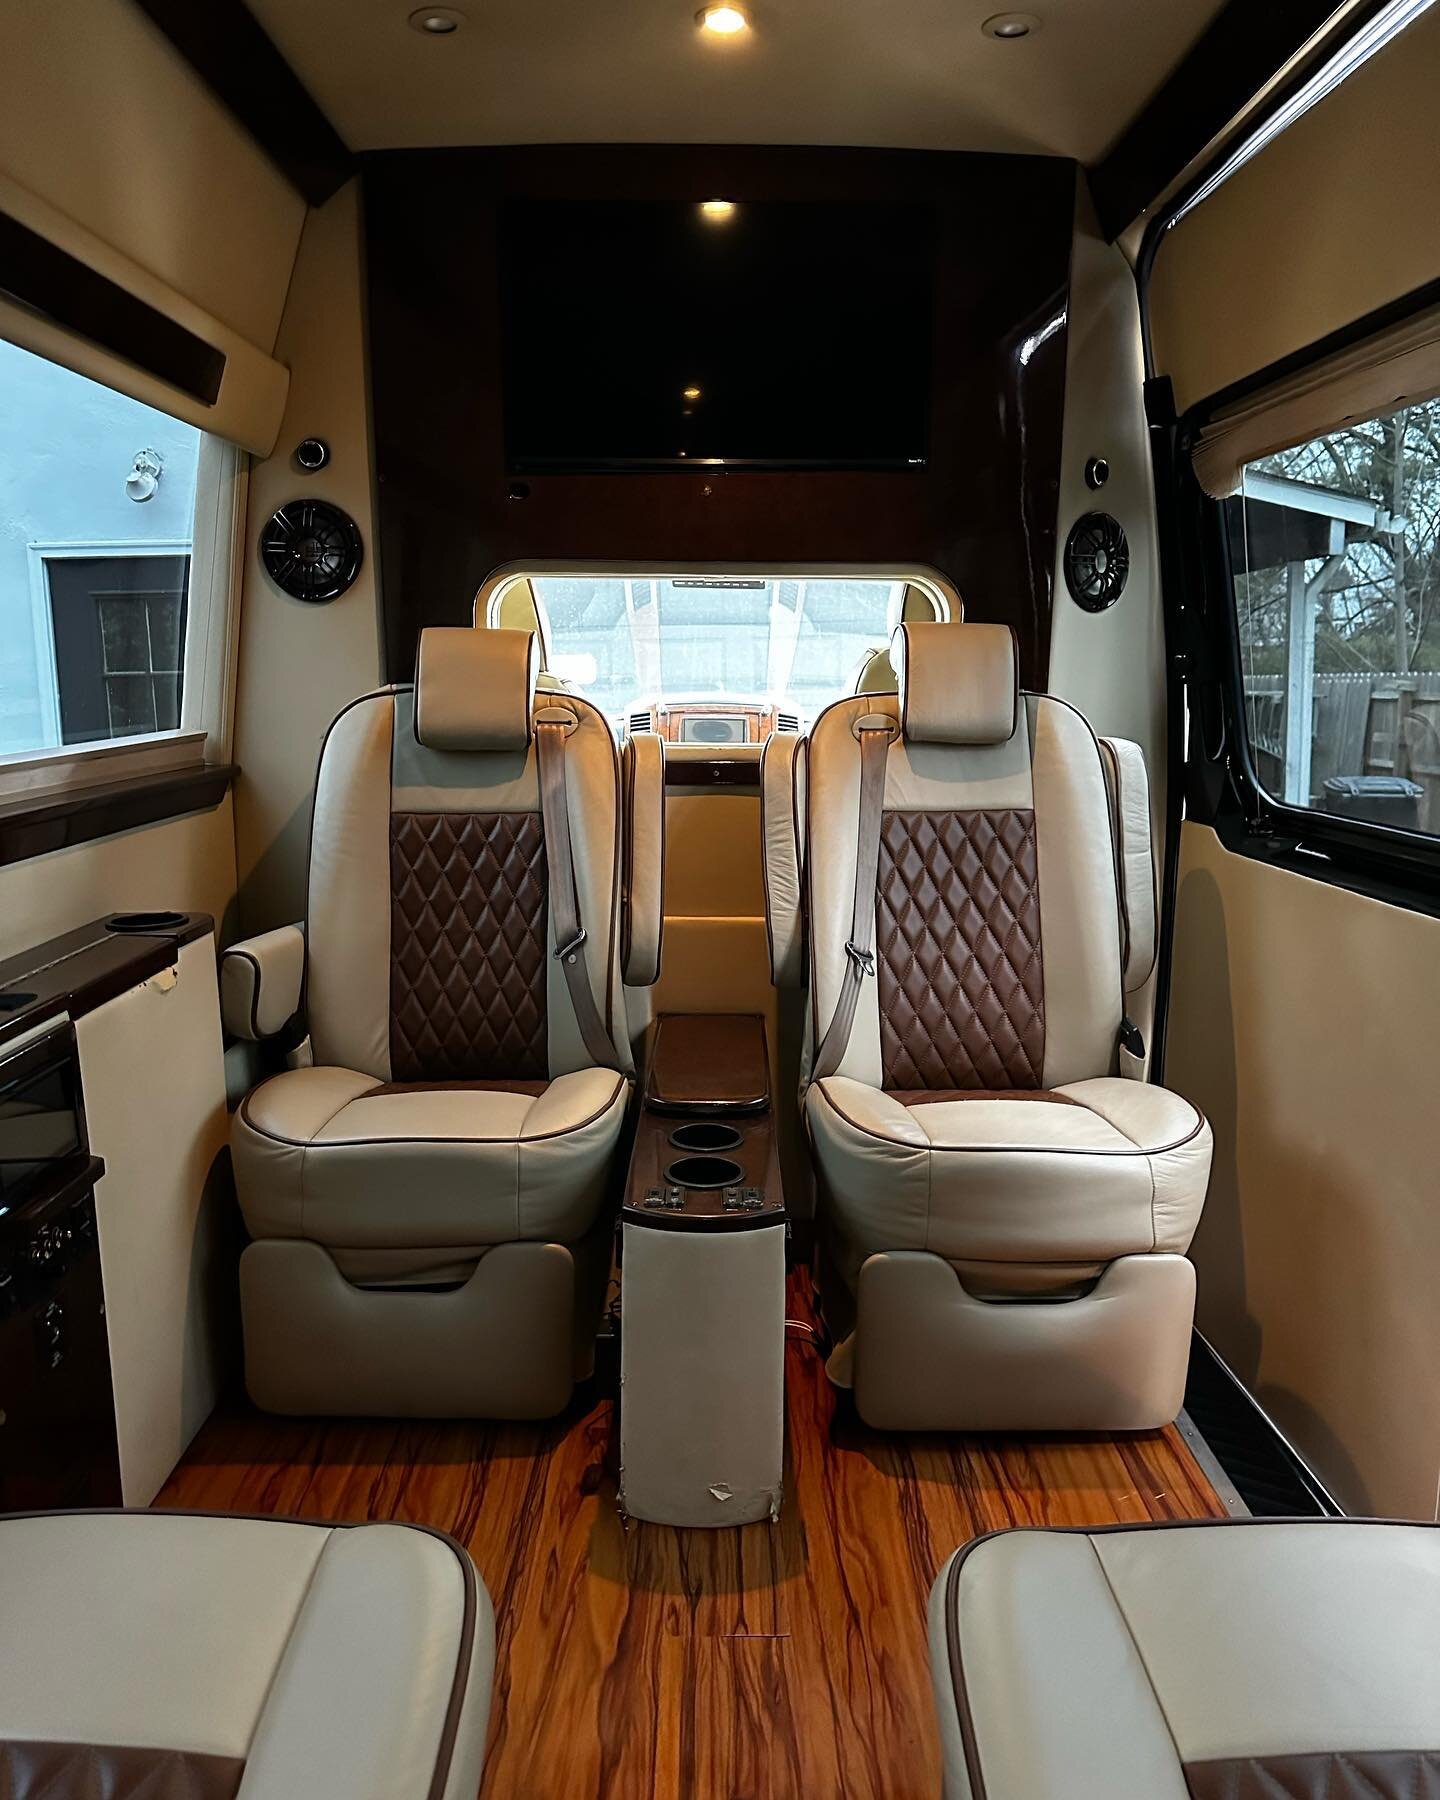 Supersized Detail ✅

Take a look at this interior! 
Where would you take this ride?

Comment below👇🏻

#mercedes #sprinter #mercedesbenz #mercedesvan #luxurylifestyle #luxury #pa #van #delco #chesco #montco #westchester